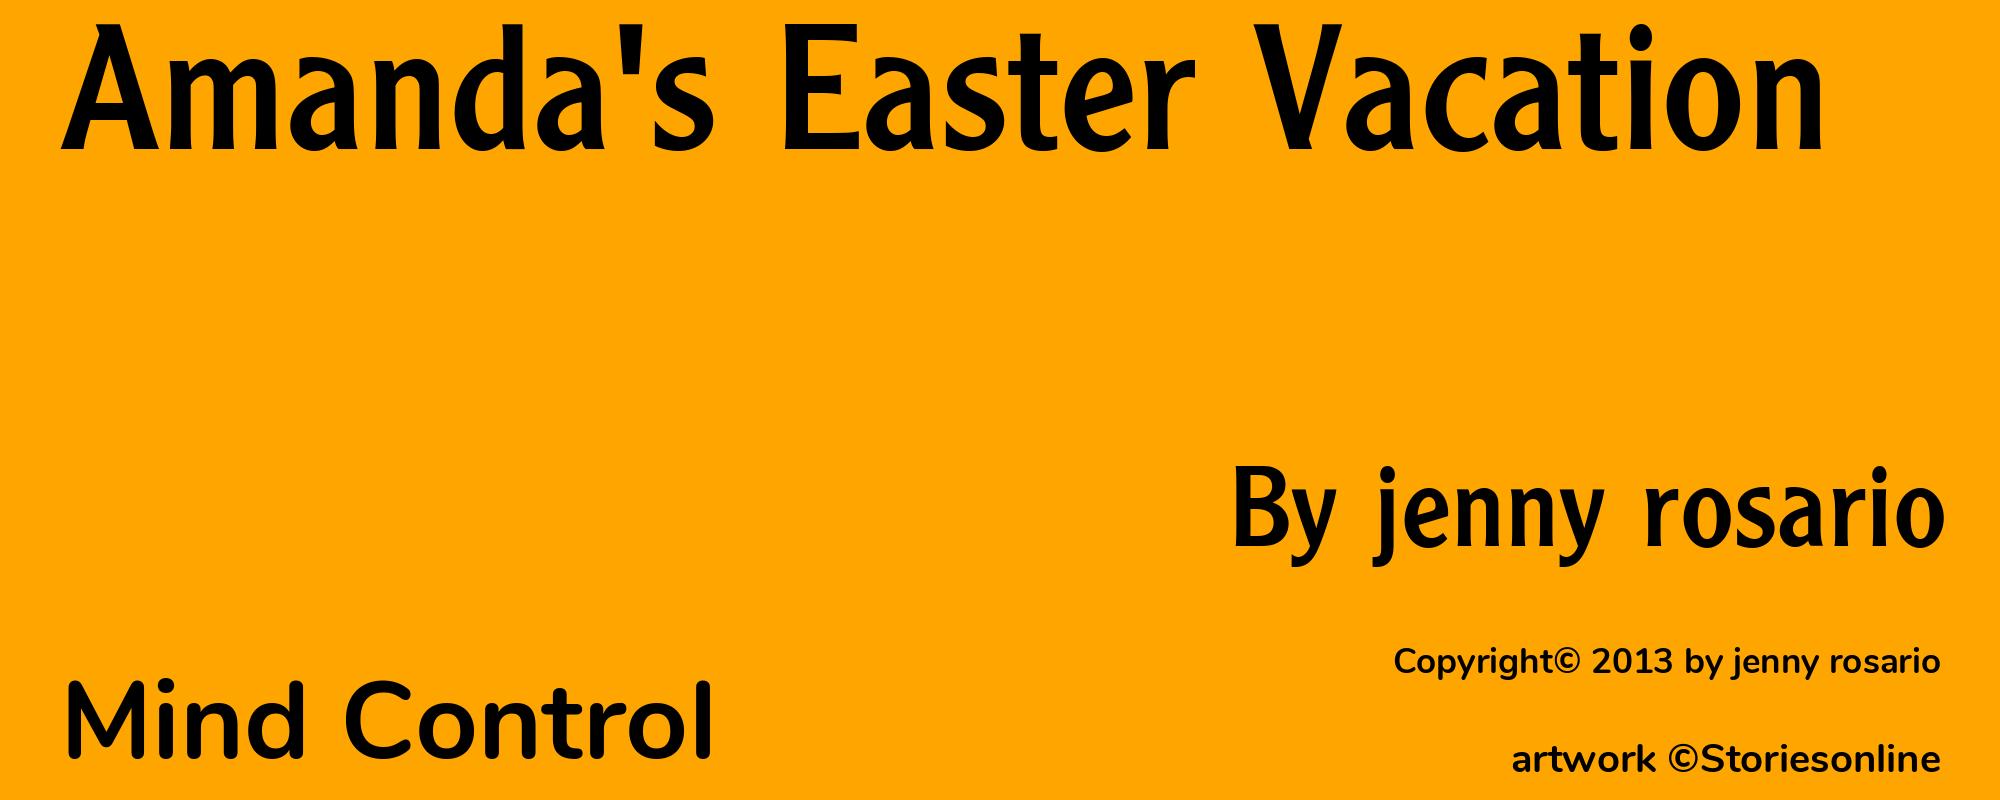 Amanda's Easter Vacation - Cover